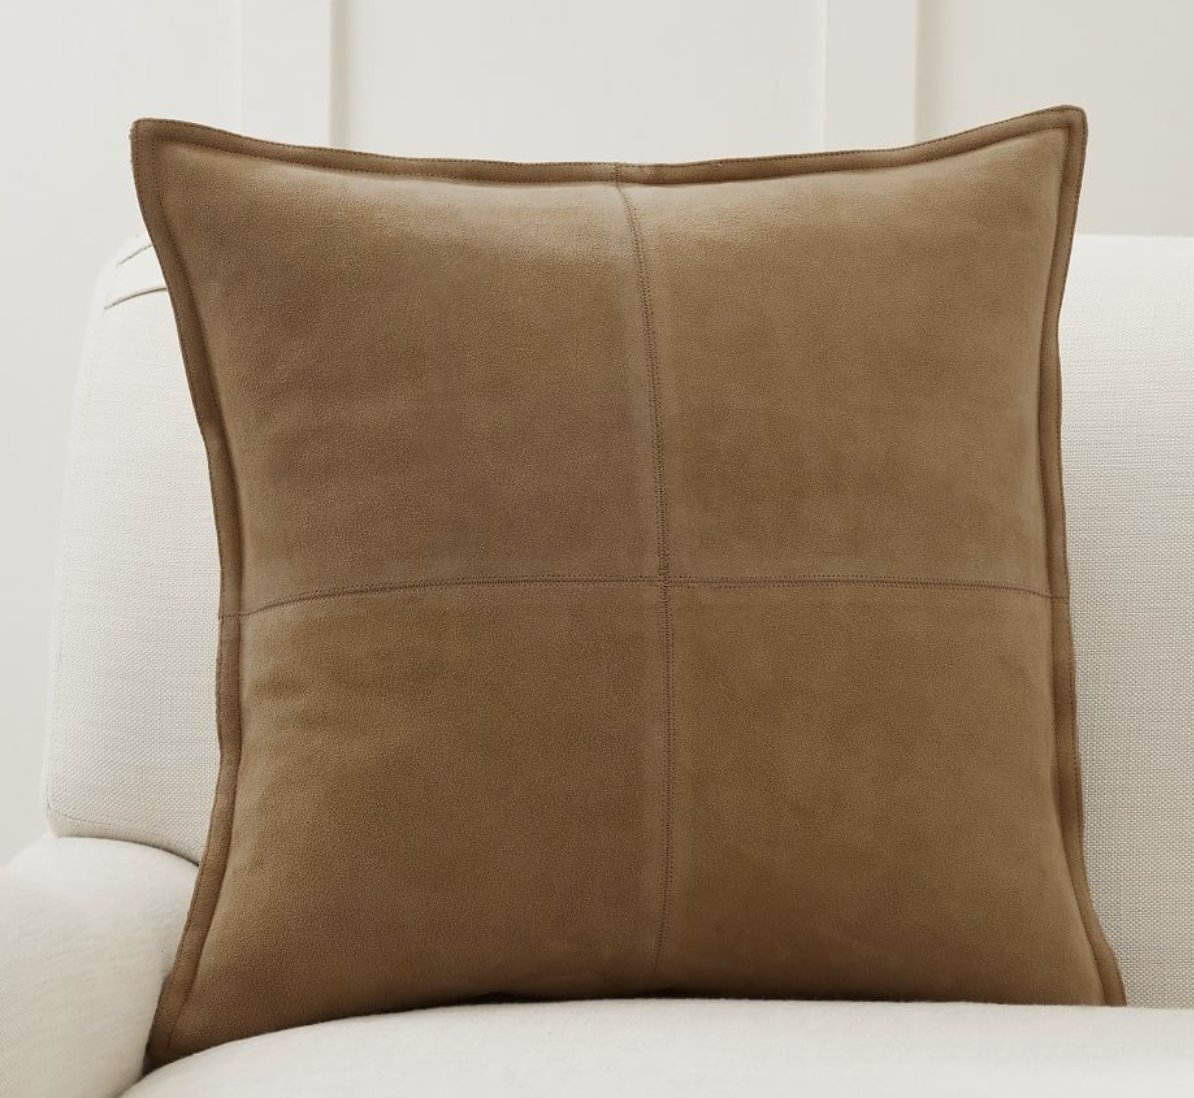 Pieced Suede Pillow Cover, 20", Camel - Image 1